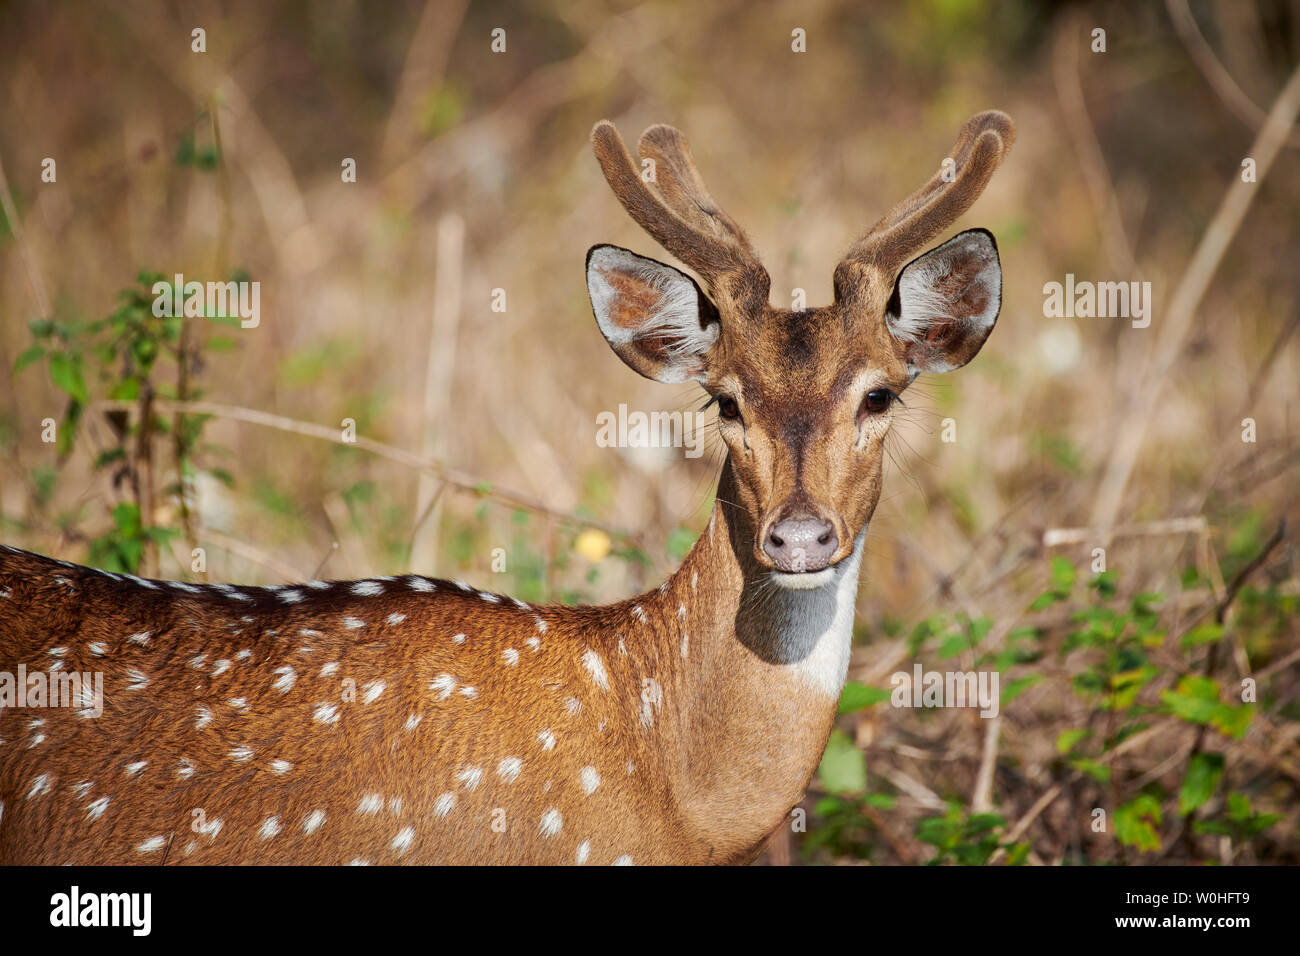 spotted deer or axis deer, Axis axis, Bandipur Tiger Reserve, Karnataka, India Stock Photo